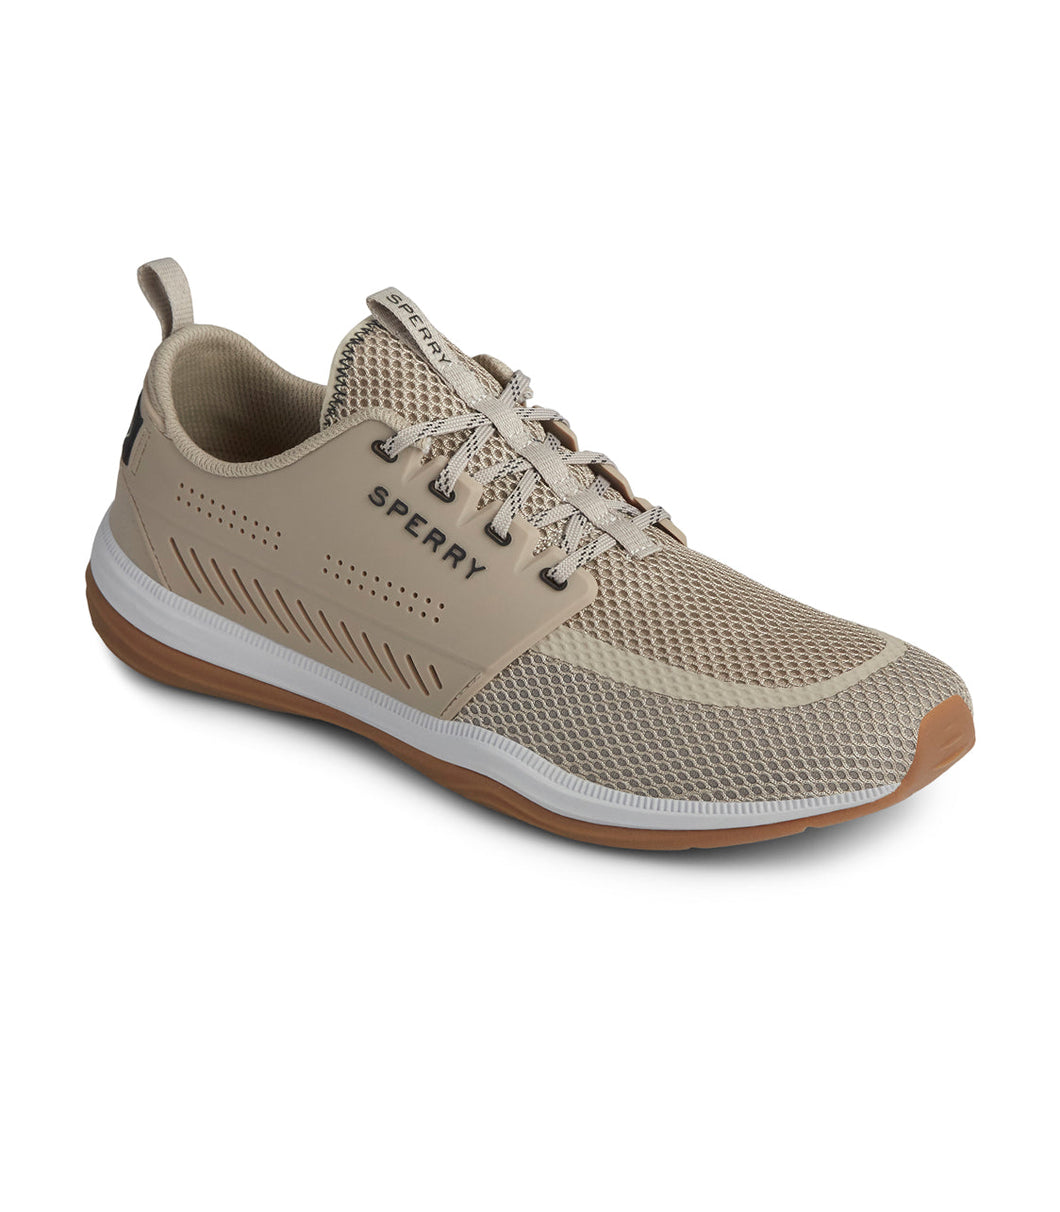 Men's Sperry H20 Skiff / Taupe STS190680